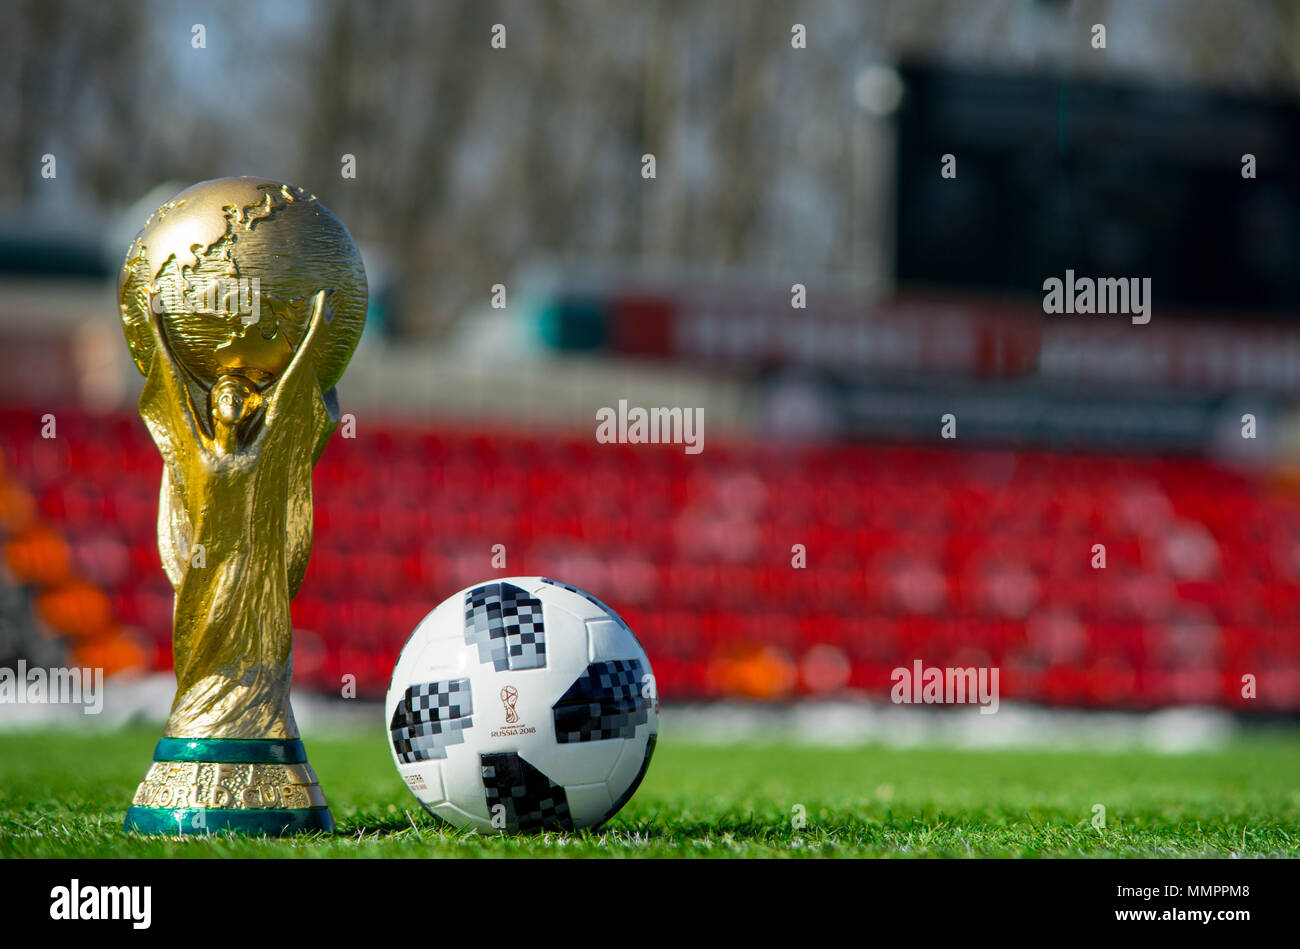 April 9, 2018 Moscow, Russia Trophy of the FIFA World Cup and official ball of FIFA World Cup 2018 Adidas Telstar 18 on the green grass of the footbal Stock Photo